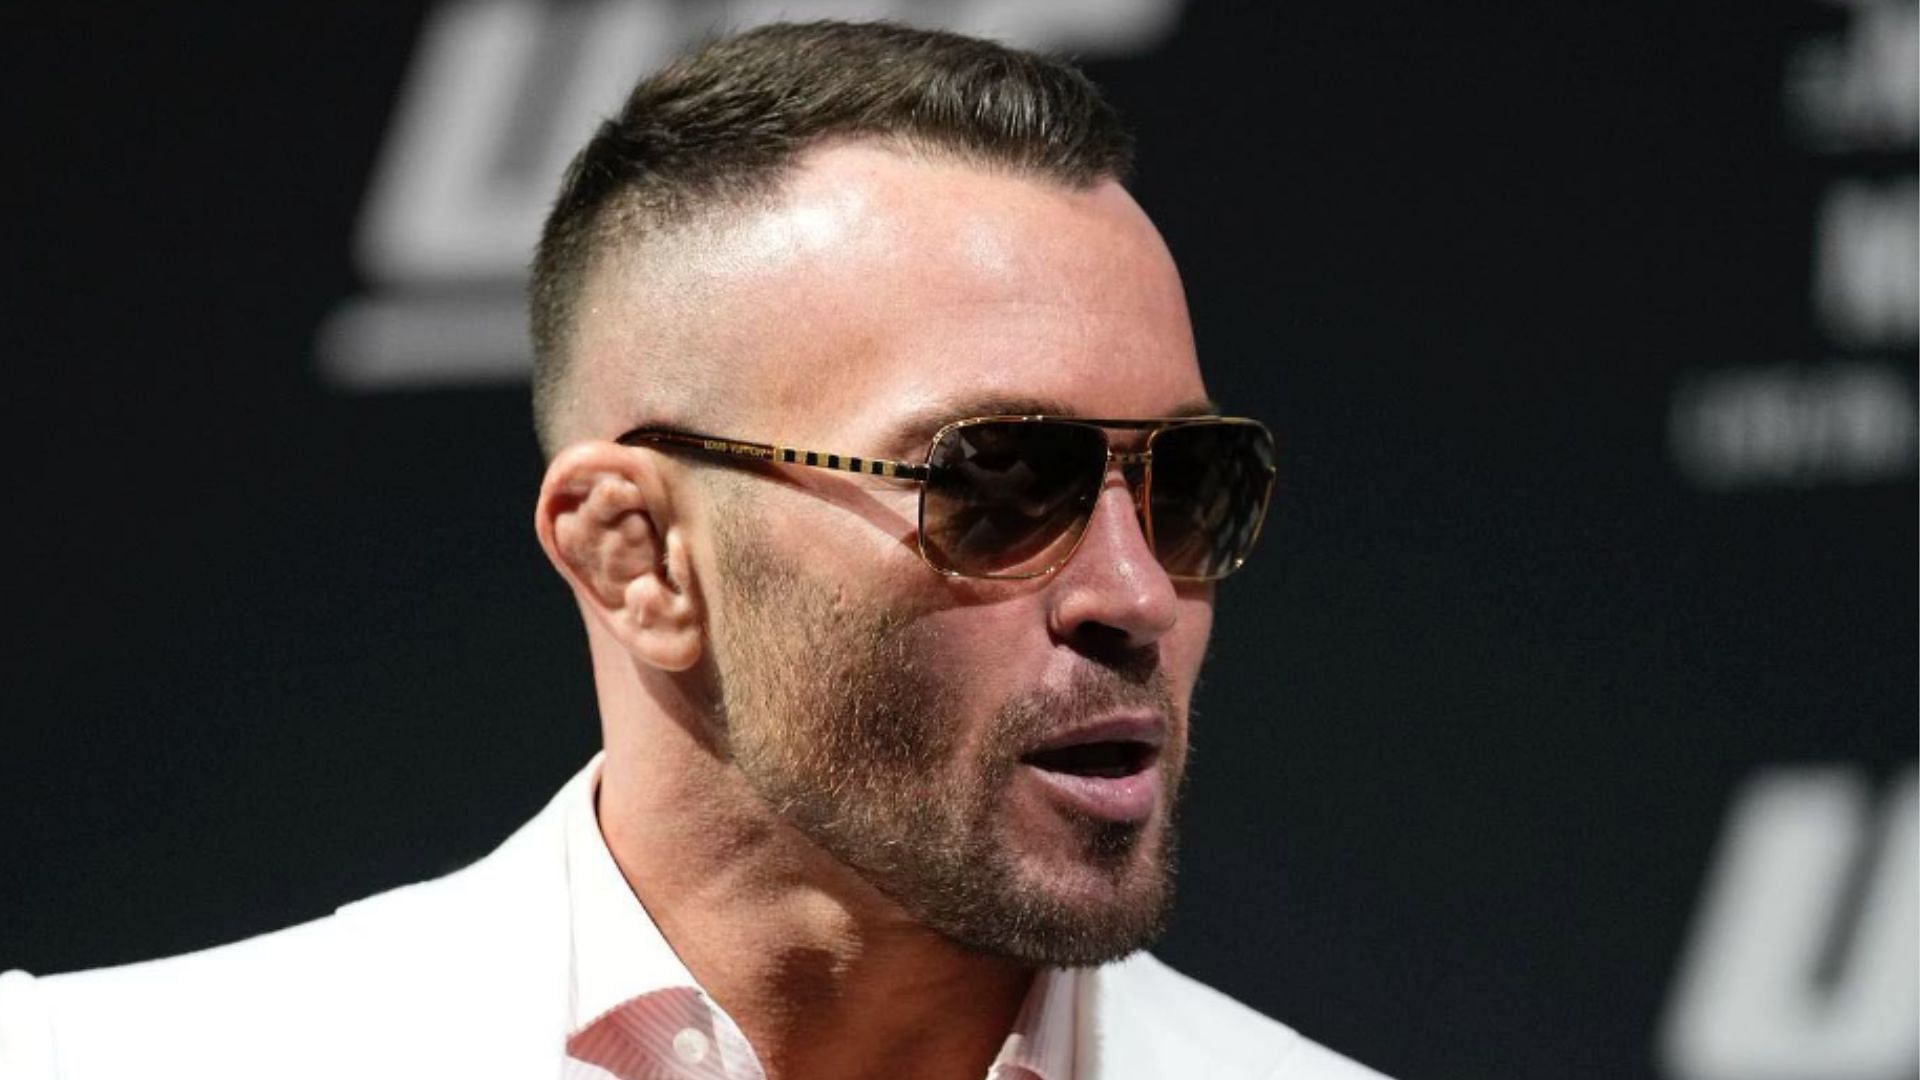 Colby Covington [Image courtesy of @colbycovmma on Instagram]